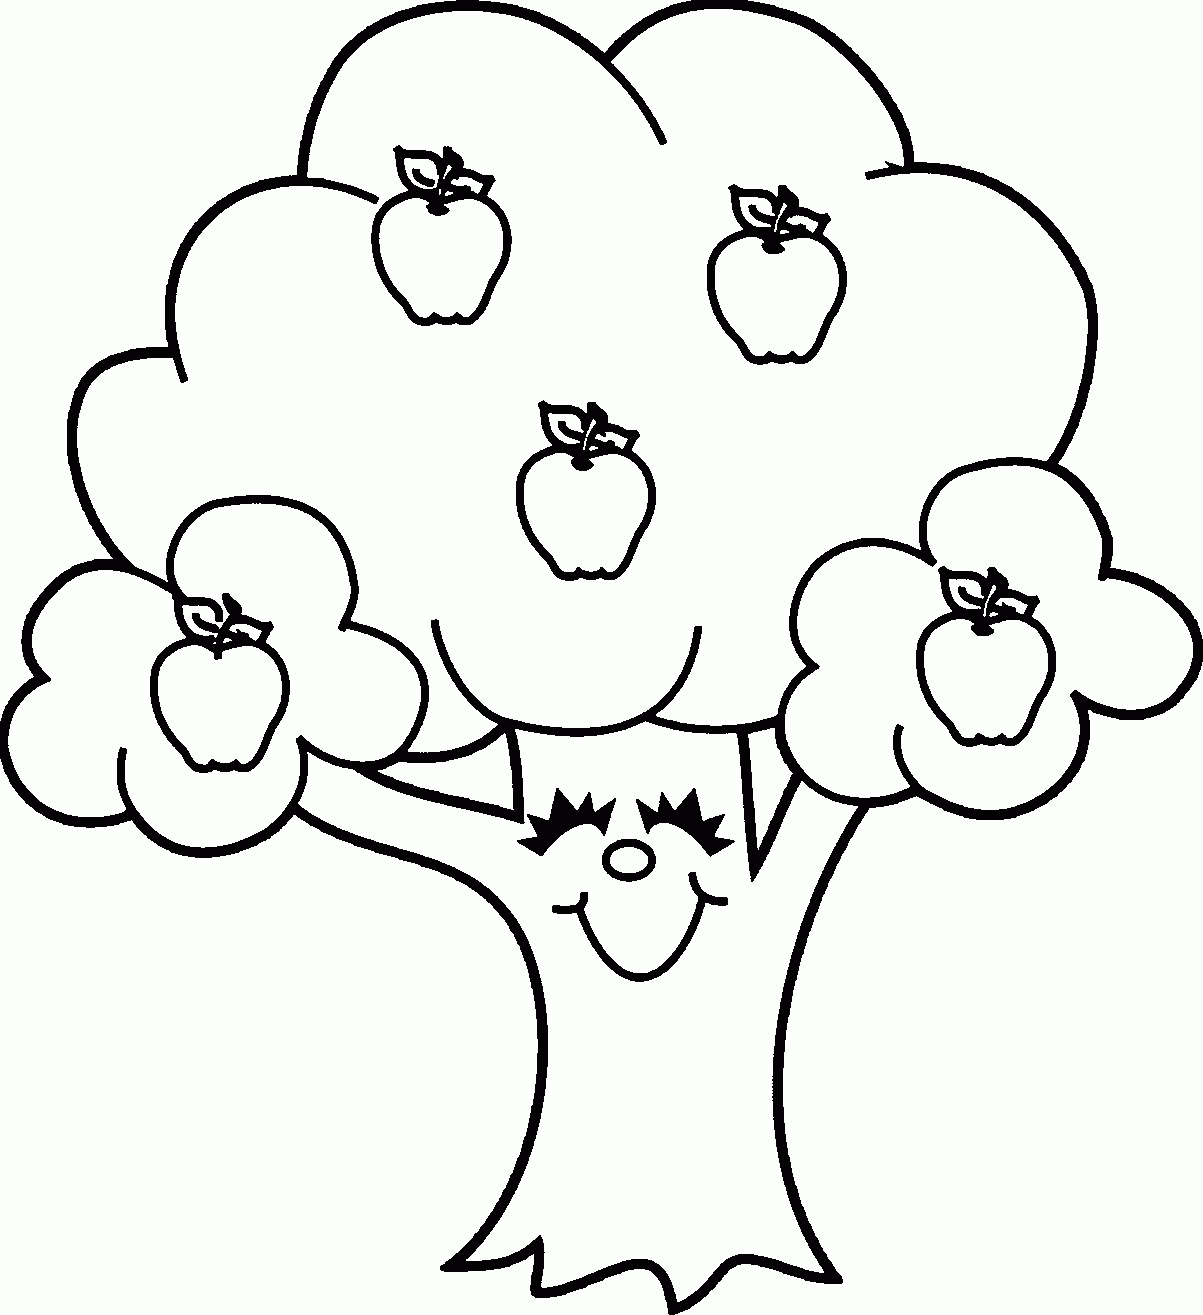 Apple Tree Coloring Page - Coloring Pages For Kids - Tree Coloring Pages Free Printable